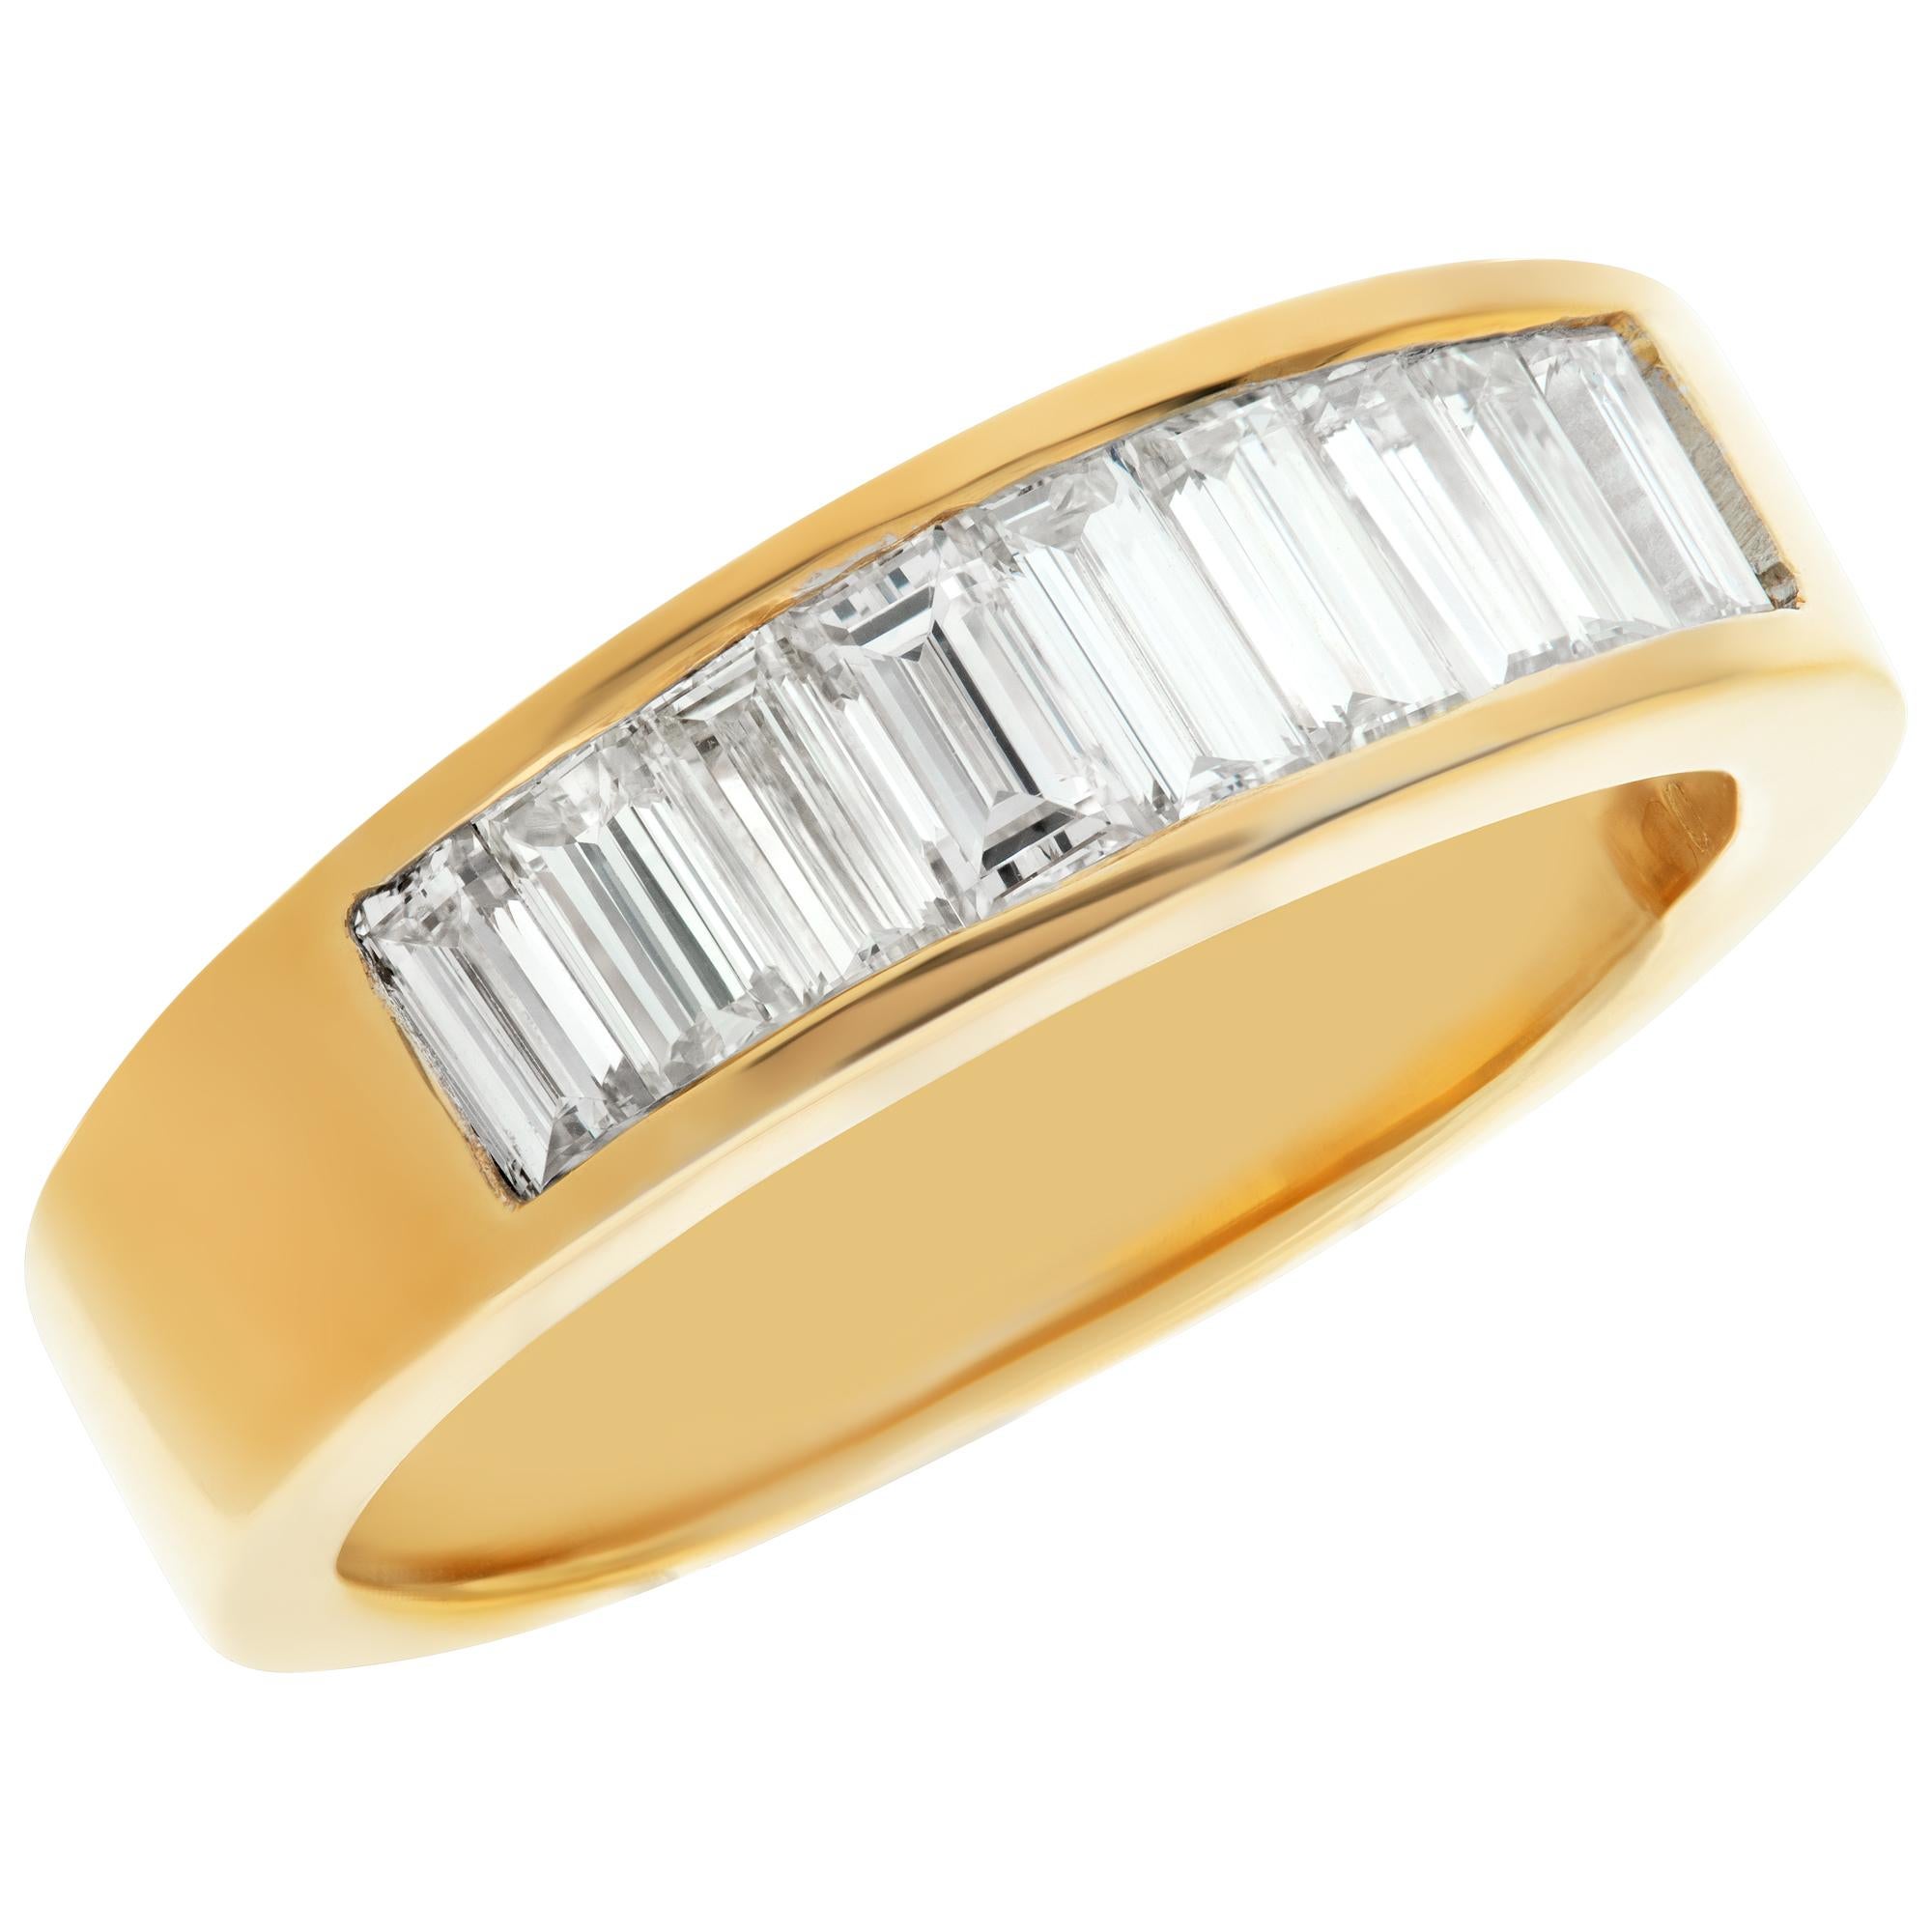 Yellow Gold Diamond Wedding Band With Approximately 1.4 Carats in diamonds In Excellent Condition For Sale In Surfside, FL